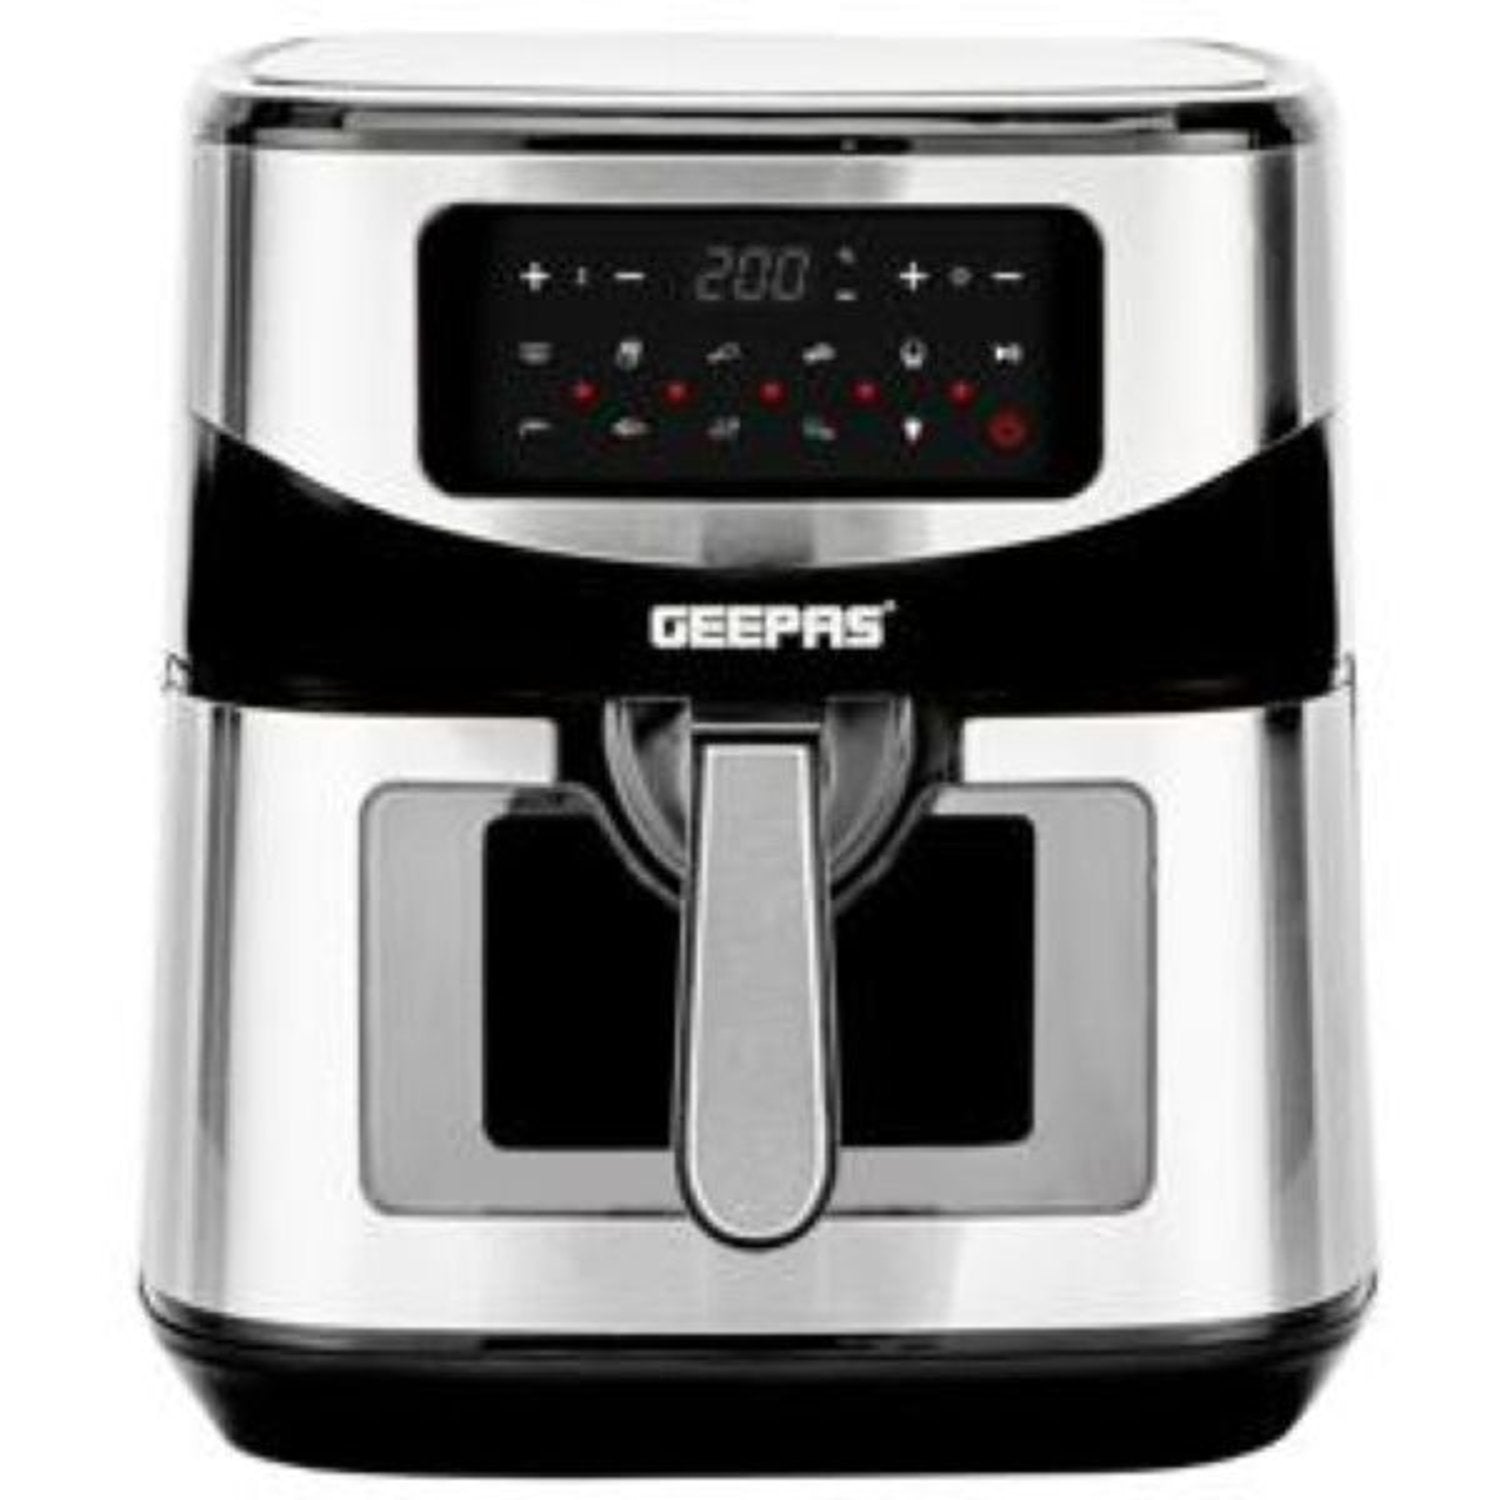 GAF37524/GEEPAS Digital Air Fryer, 9.2 L Capacity With A Rack, Equipped With VORTEX Air Frying Techn AIR FRYER / 9.2 L